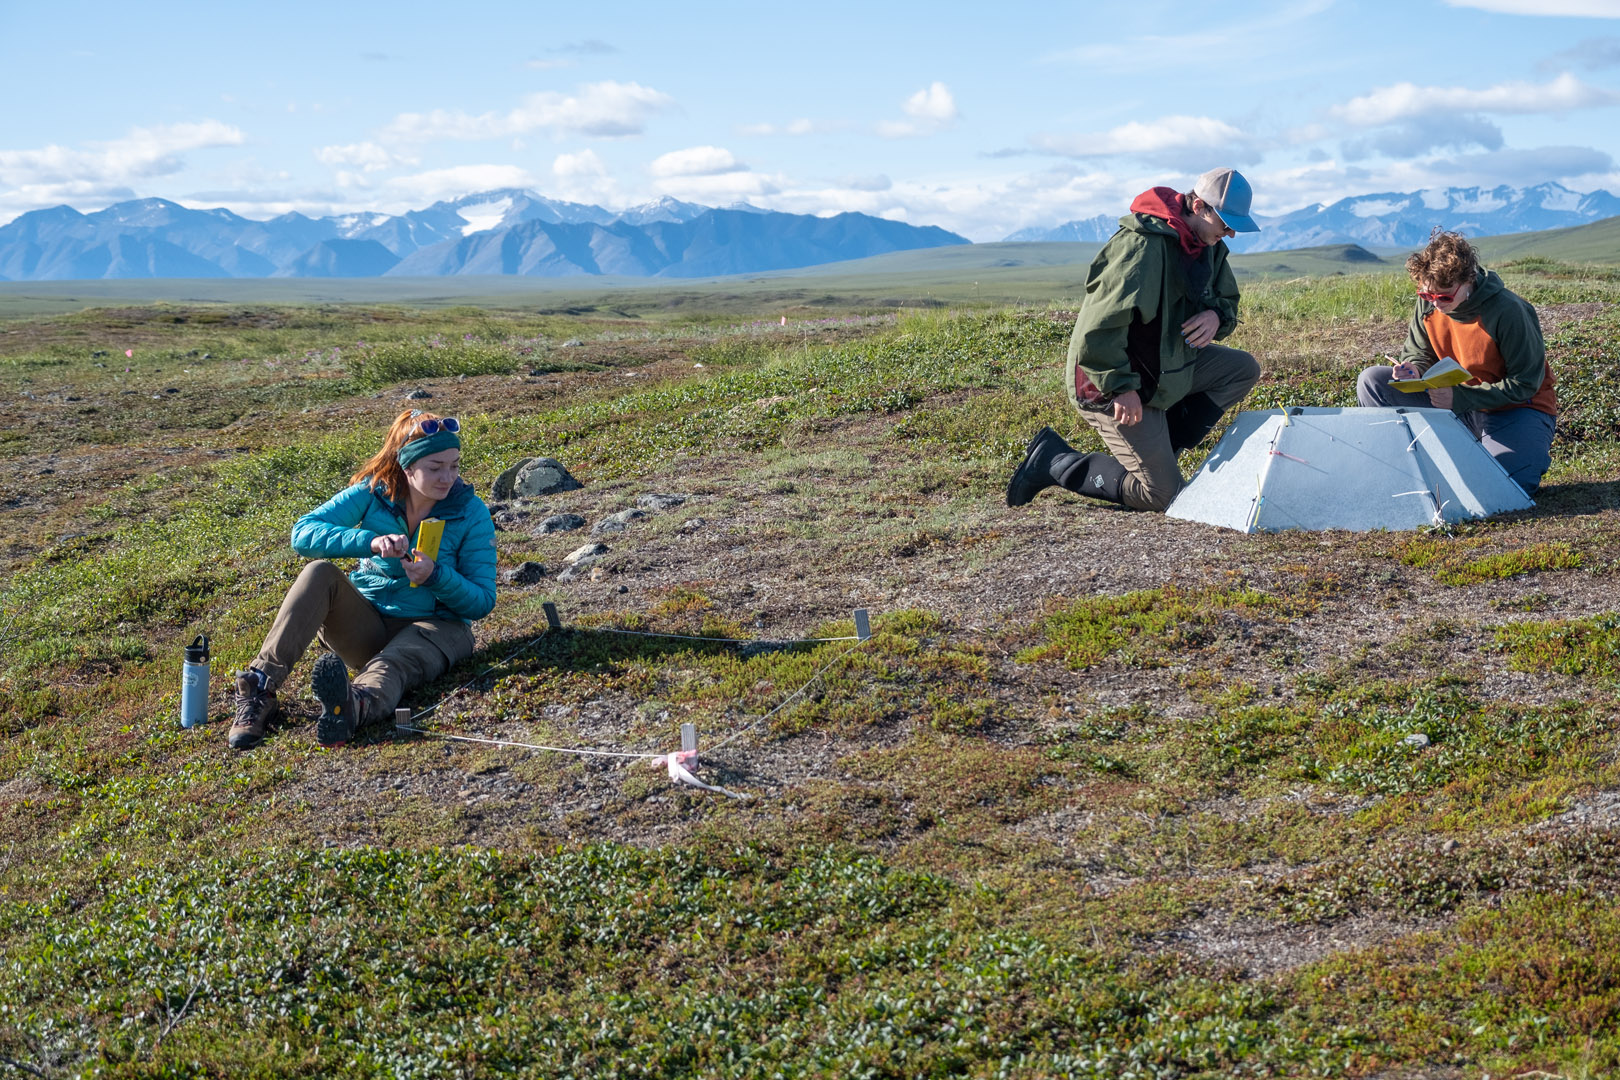 Caroline Brose ’22, Zach Ginn ’23, and Luca Keon ’25 are pictured in front of the Brooks Range quantifying flowering in dry heath tundra. Photo taken by Sarah Ansbro in June 2022.